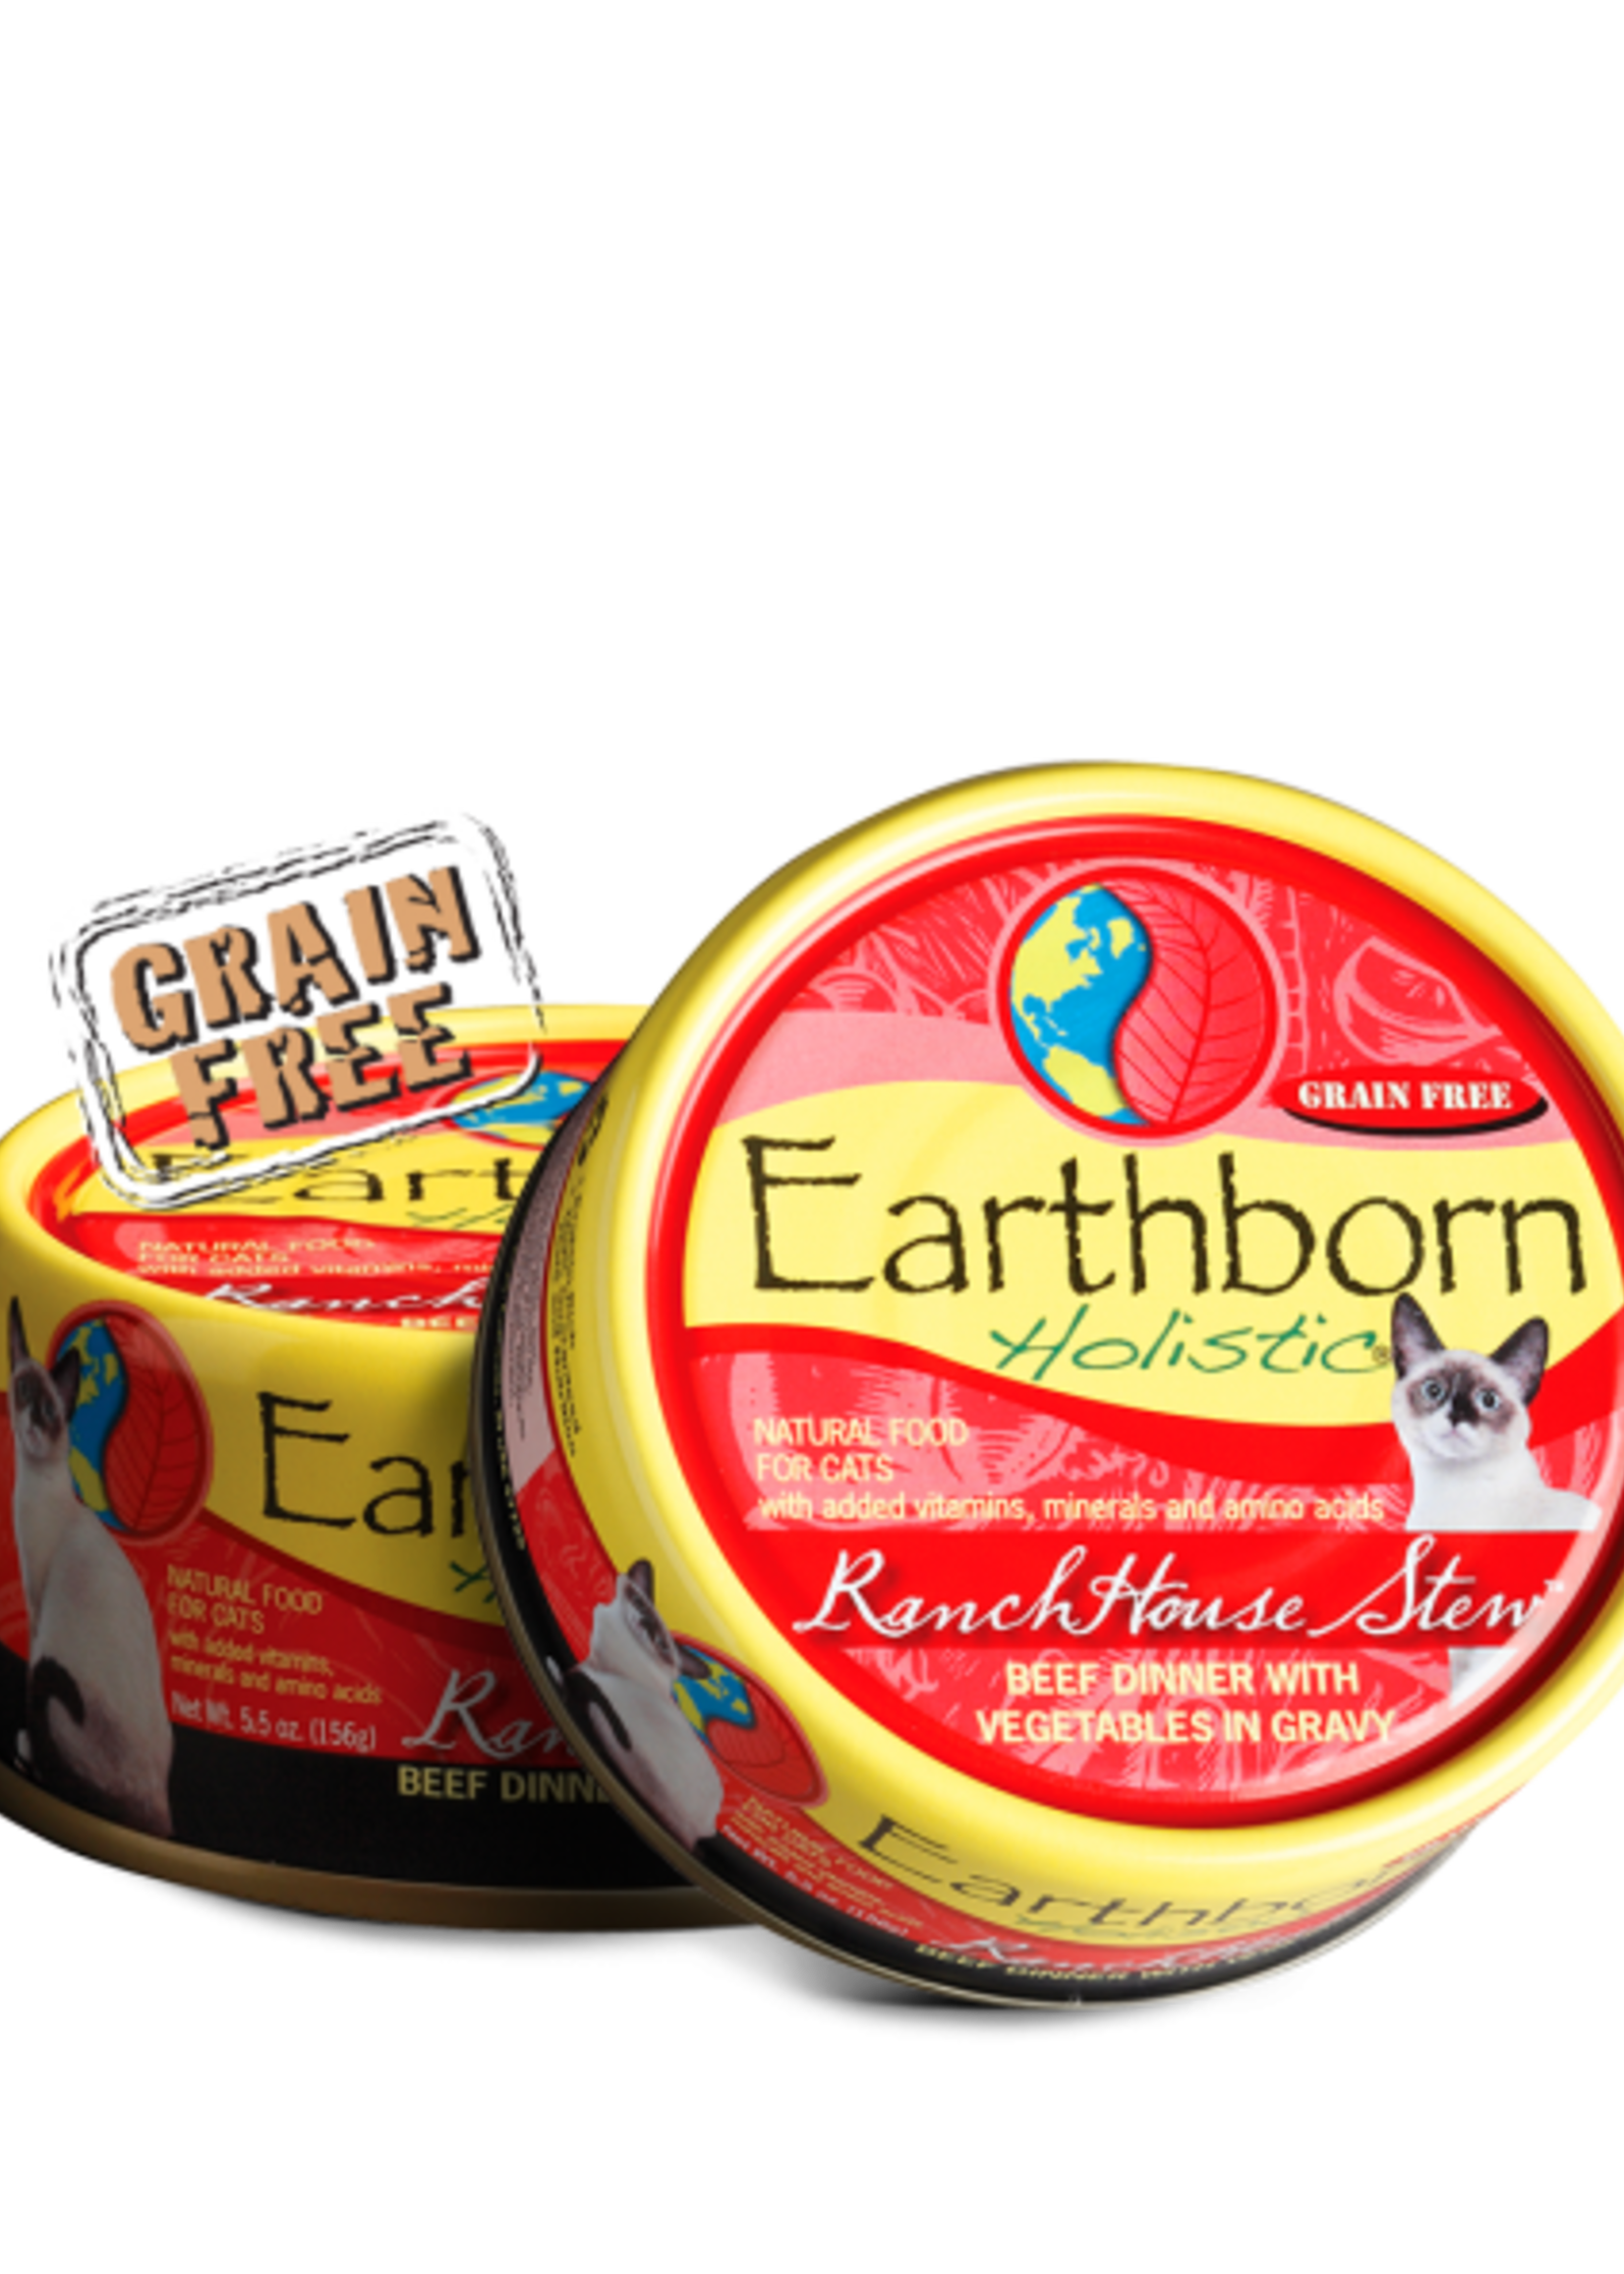 Earthborn by Midwestern Pet Earthborn Cat Can Holistic RanchHouse Stew 5.5 oz